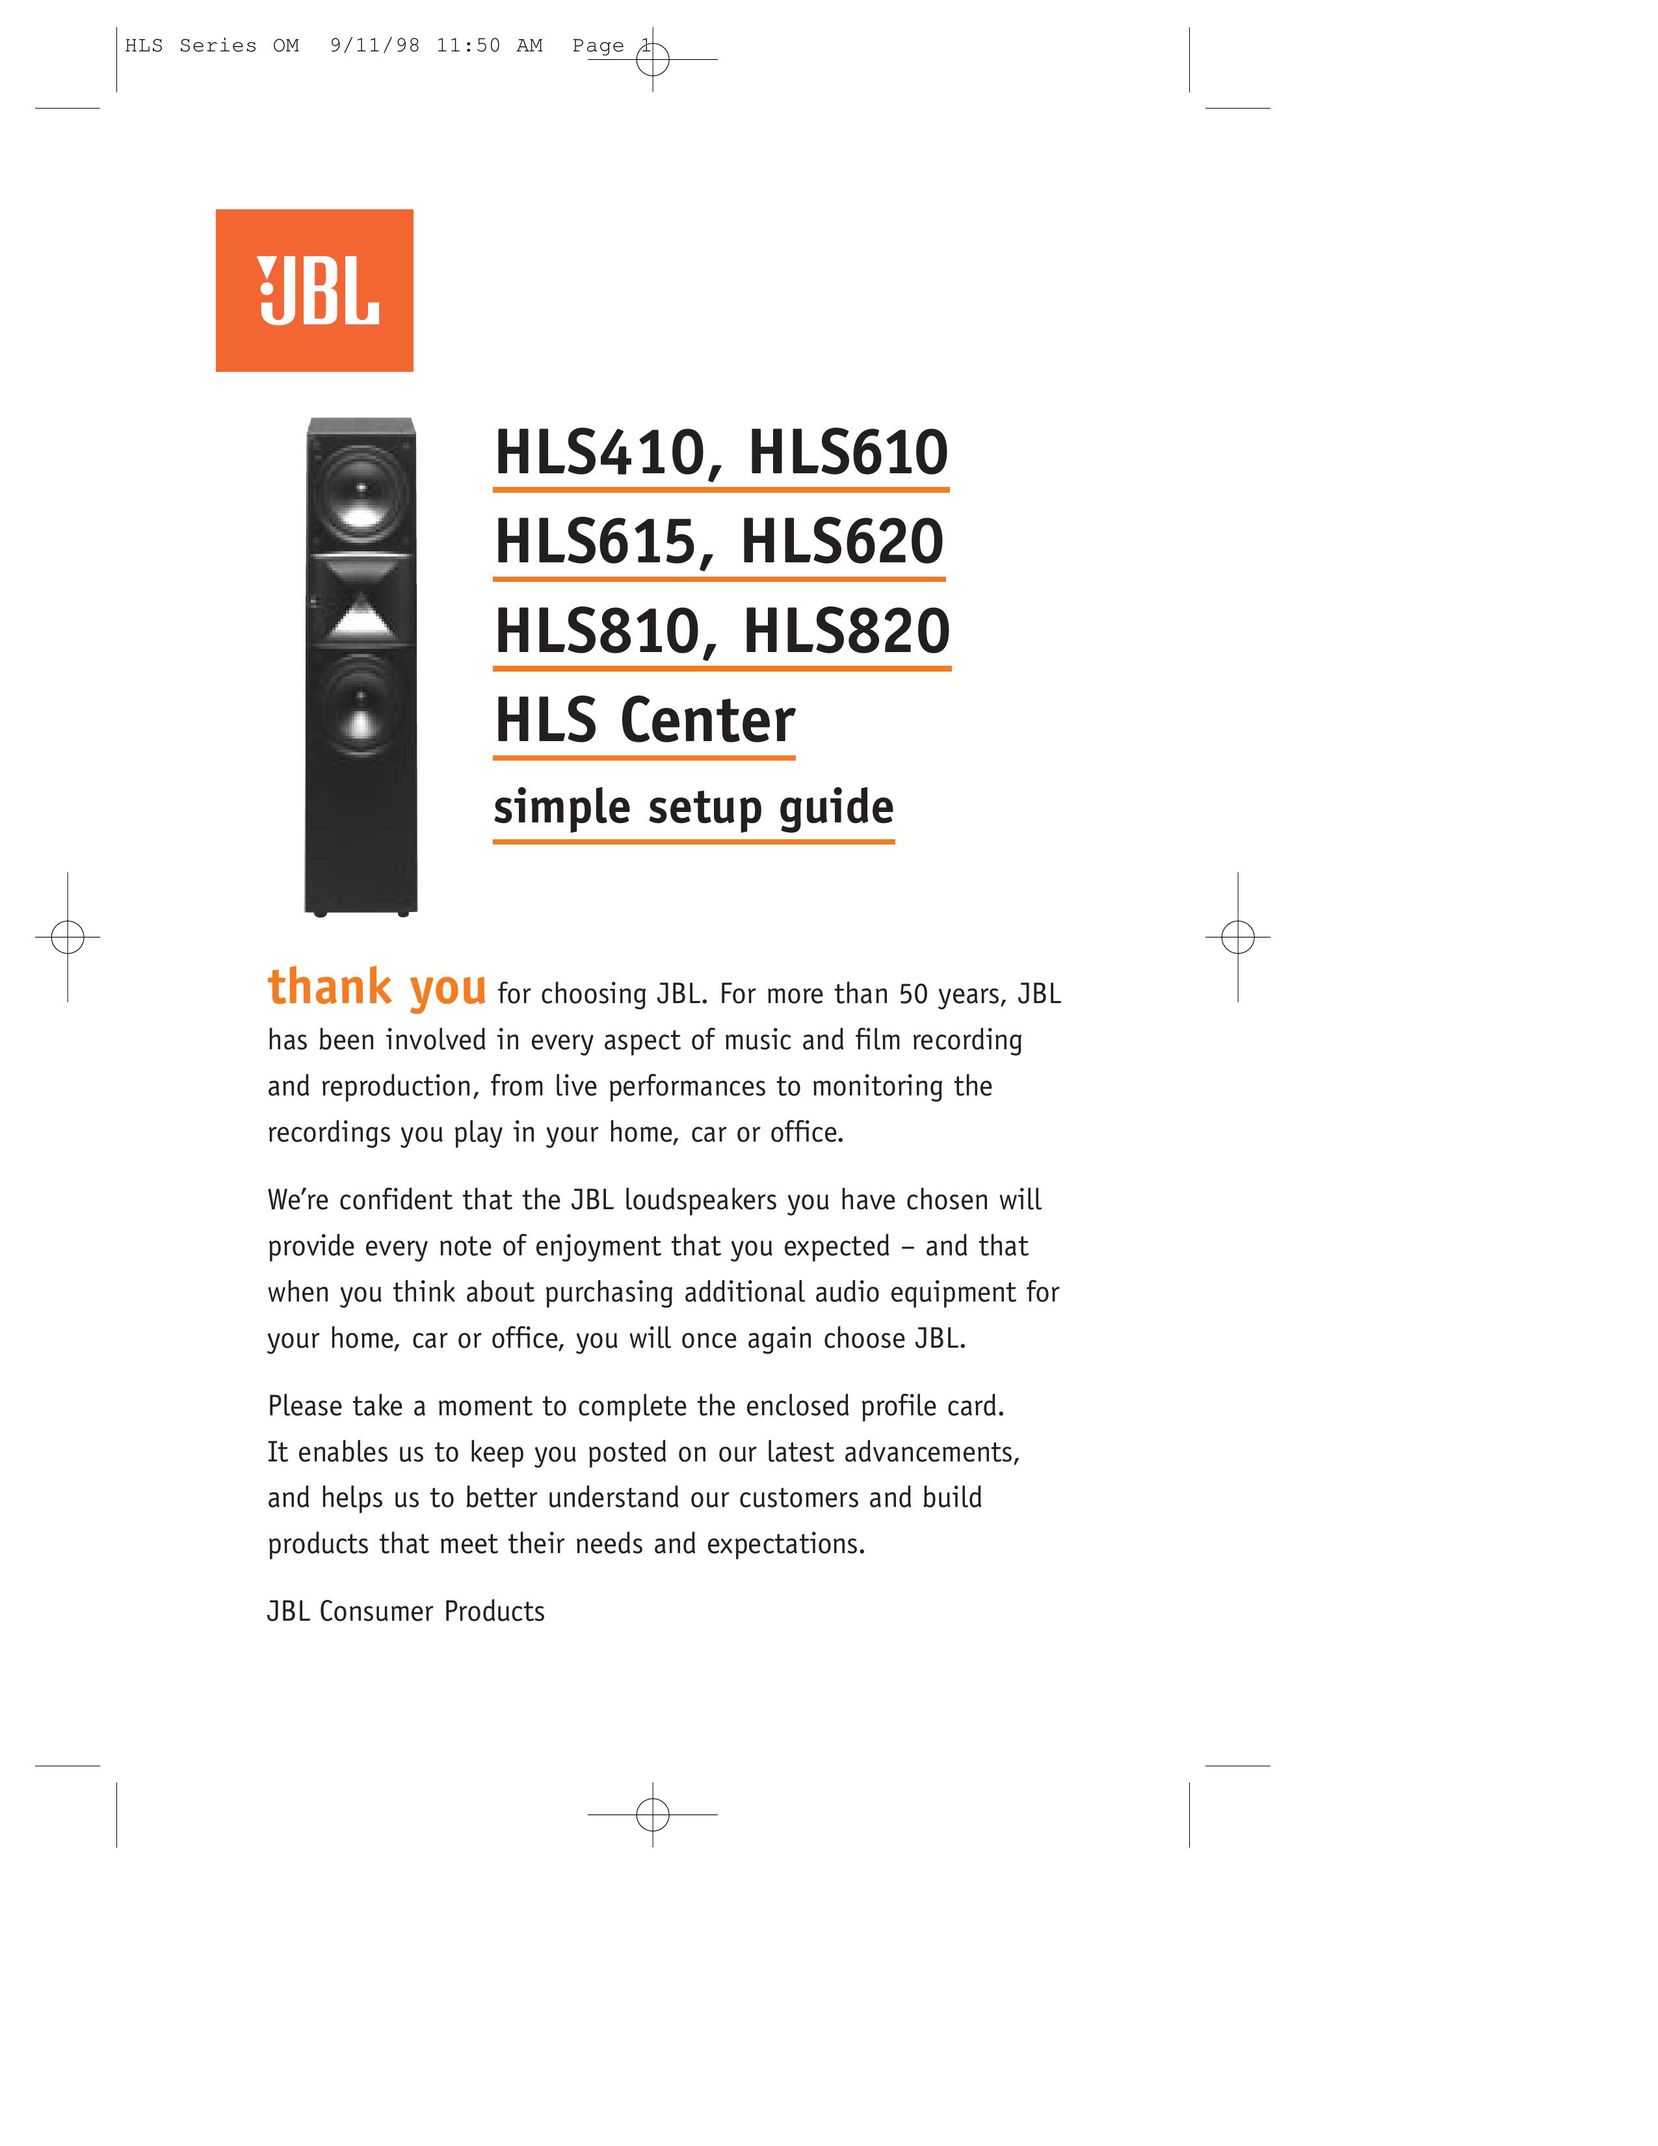 JBL HLS810 Home Theater System User Manual